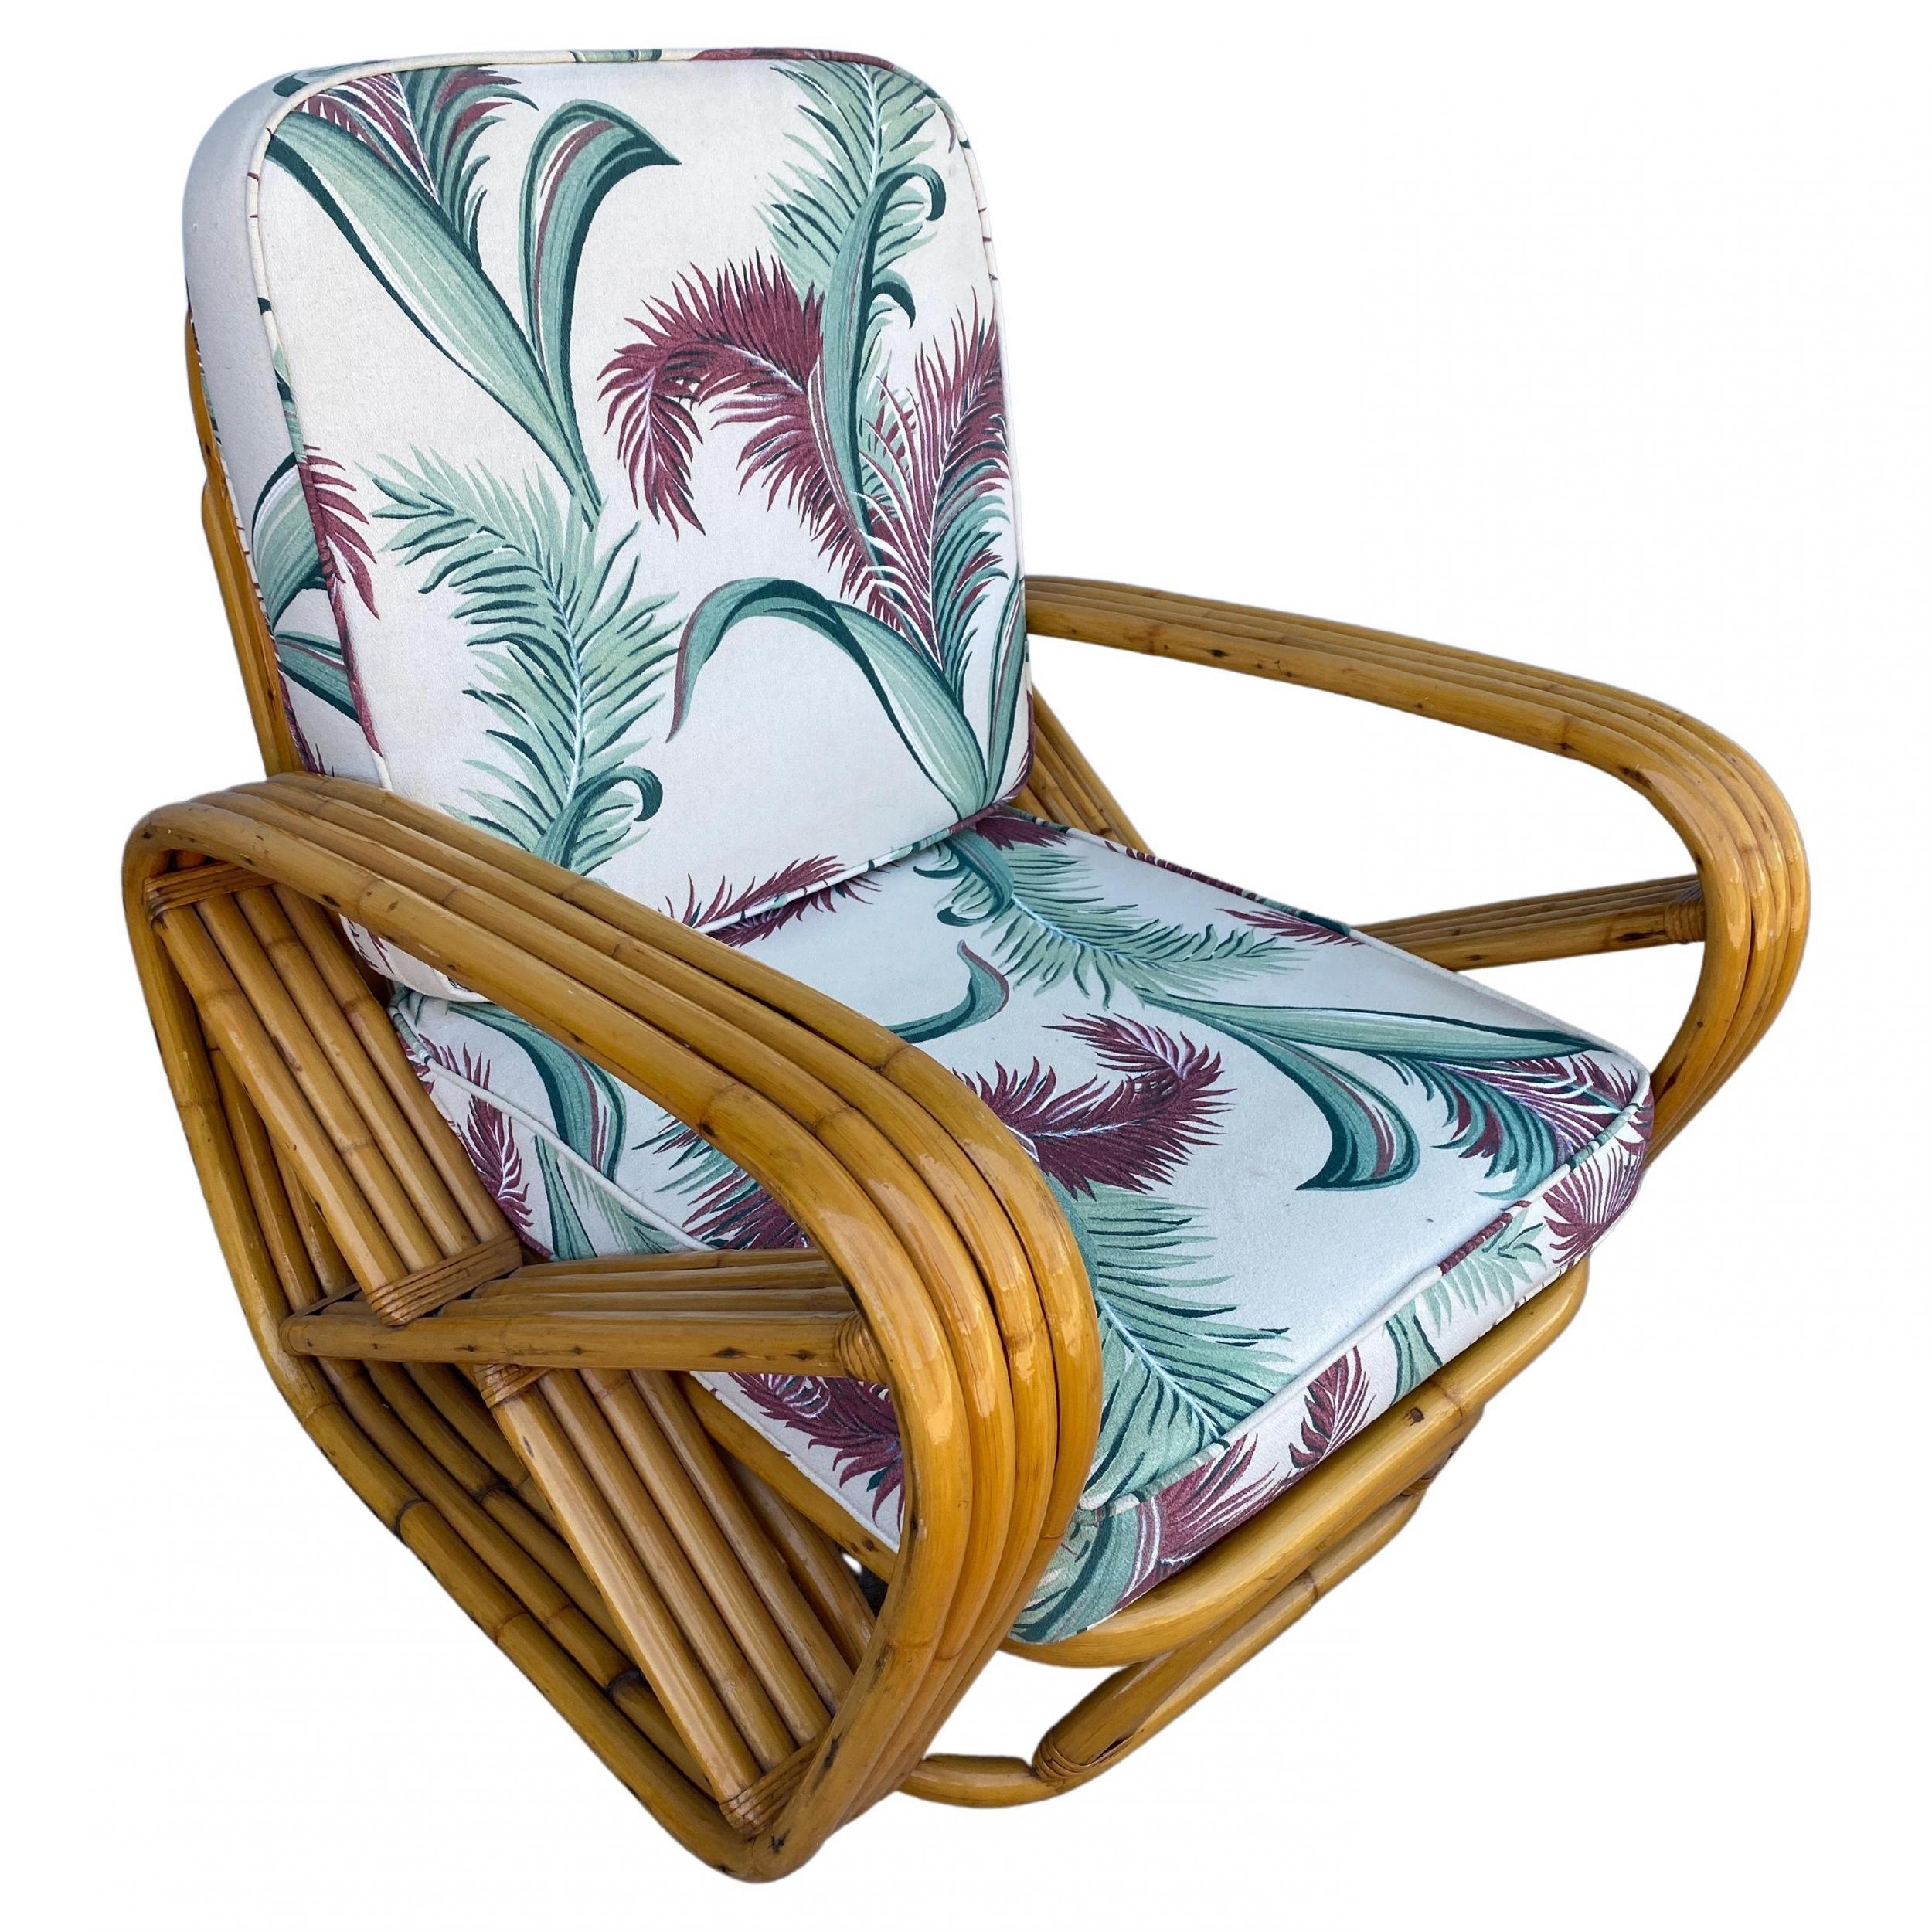 Designed in the manner of Paul Frankl, this four-strand rattan lounge chair features square pretzel arms and an open arched base.

Included is the matching stacked rattan ottoman.

Lounge chair: 33